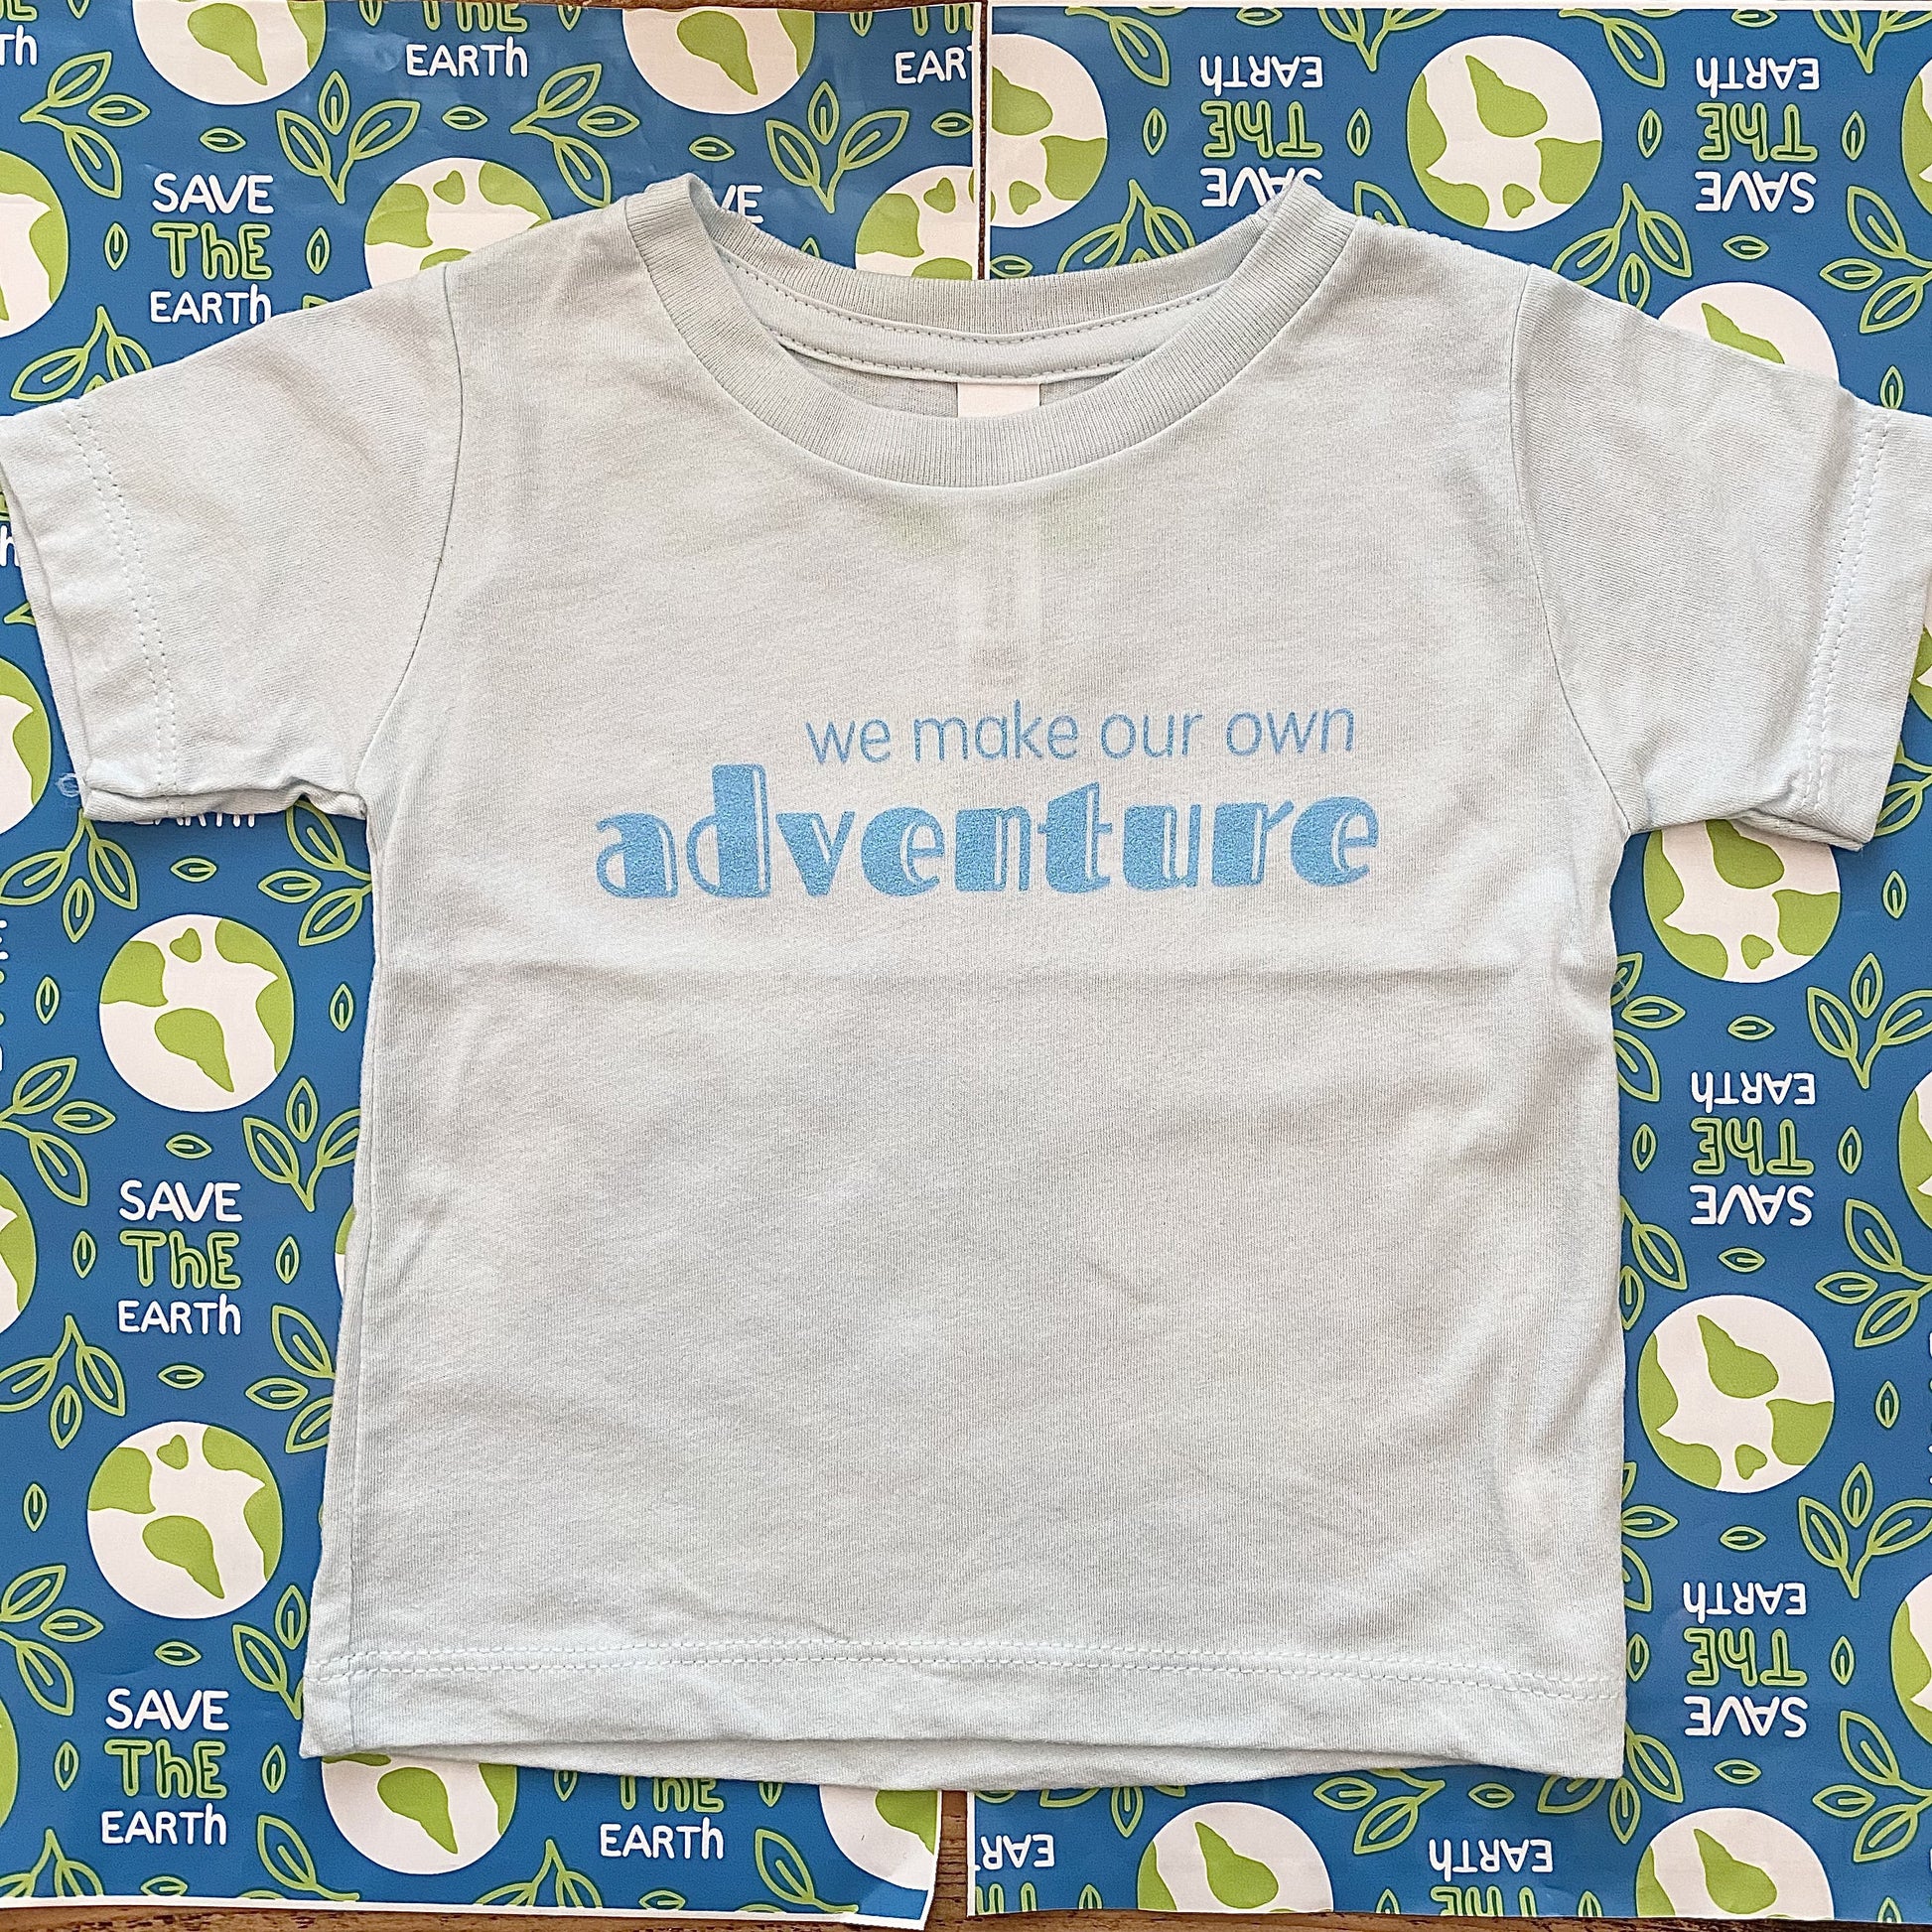 WE MAKE OUR OWN ADVENTURE - Short Sleeve Toddler T Shirt - Little Mate Adventures